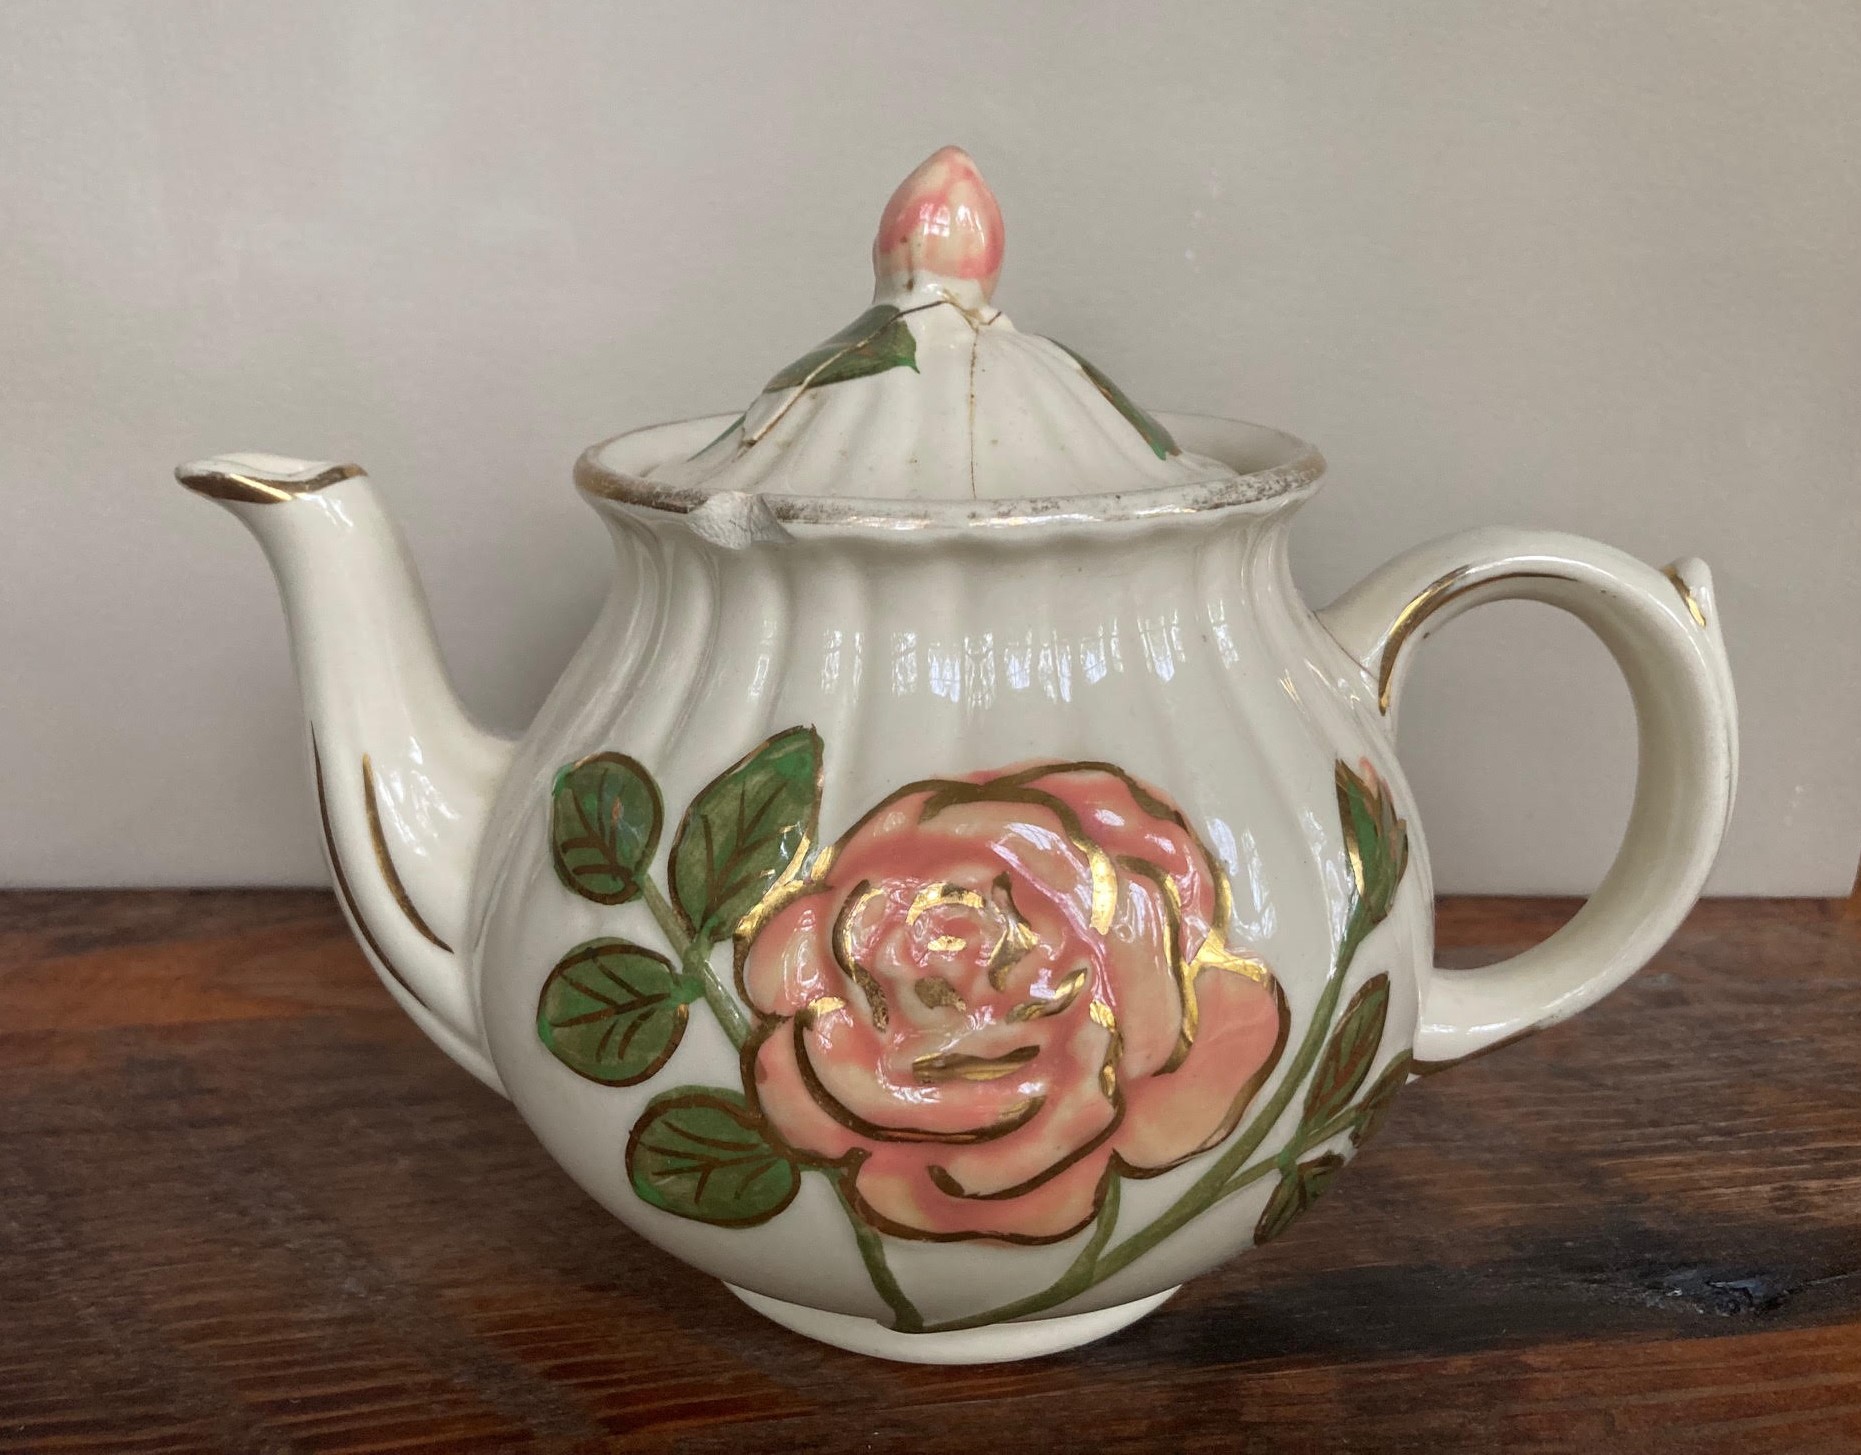 Photo of a porcelain teapot decorated with a pink rose.